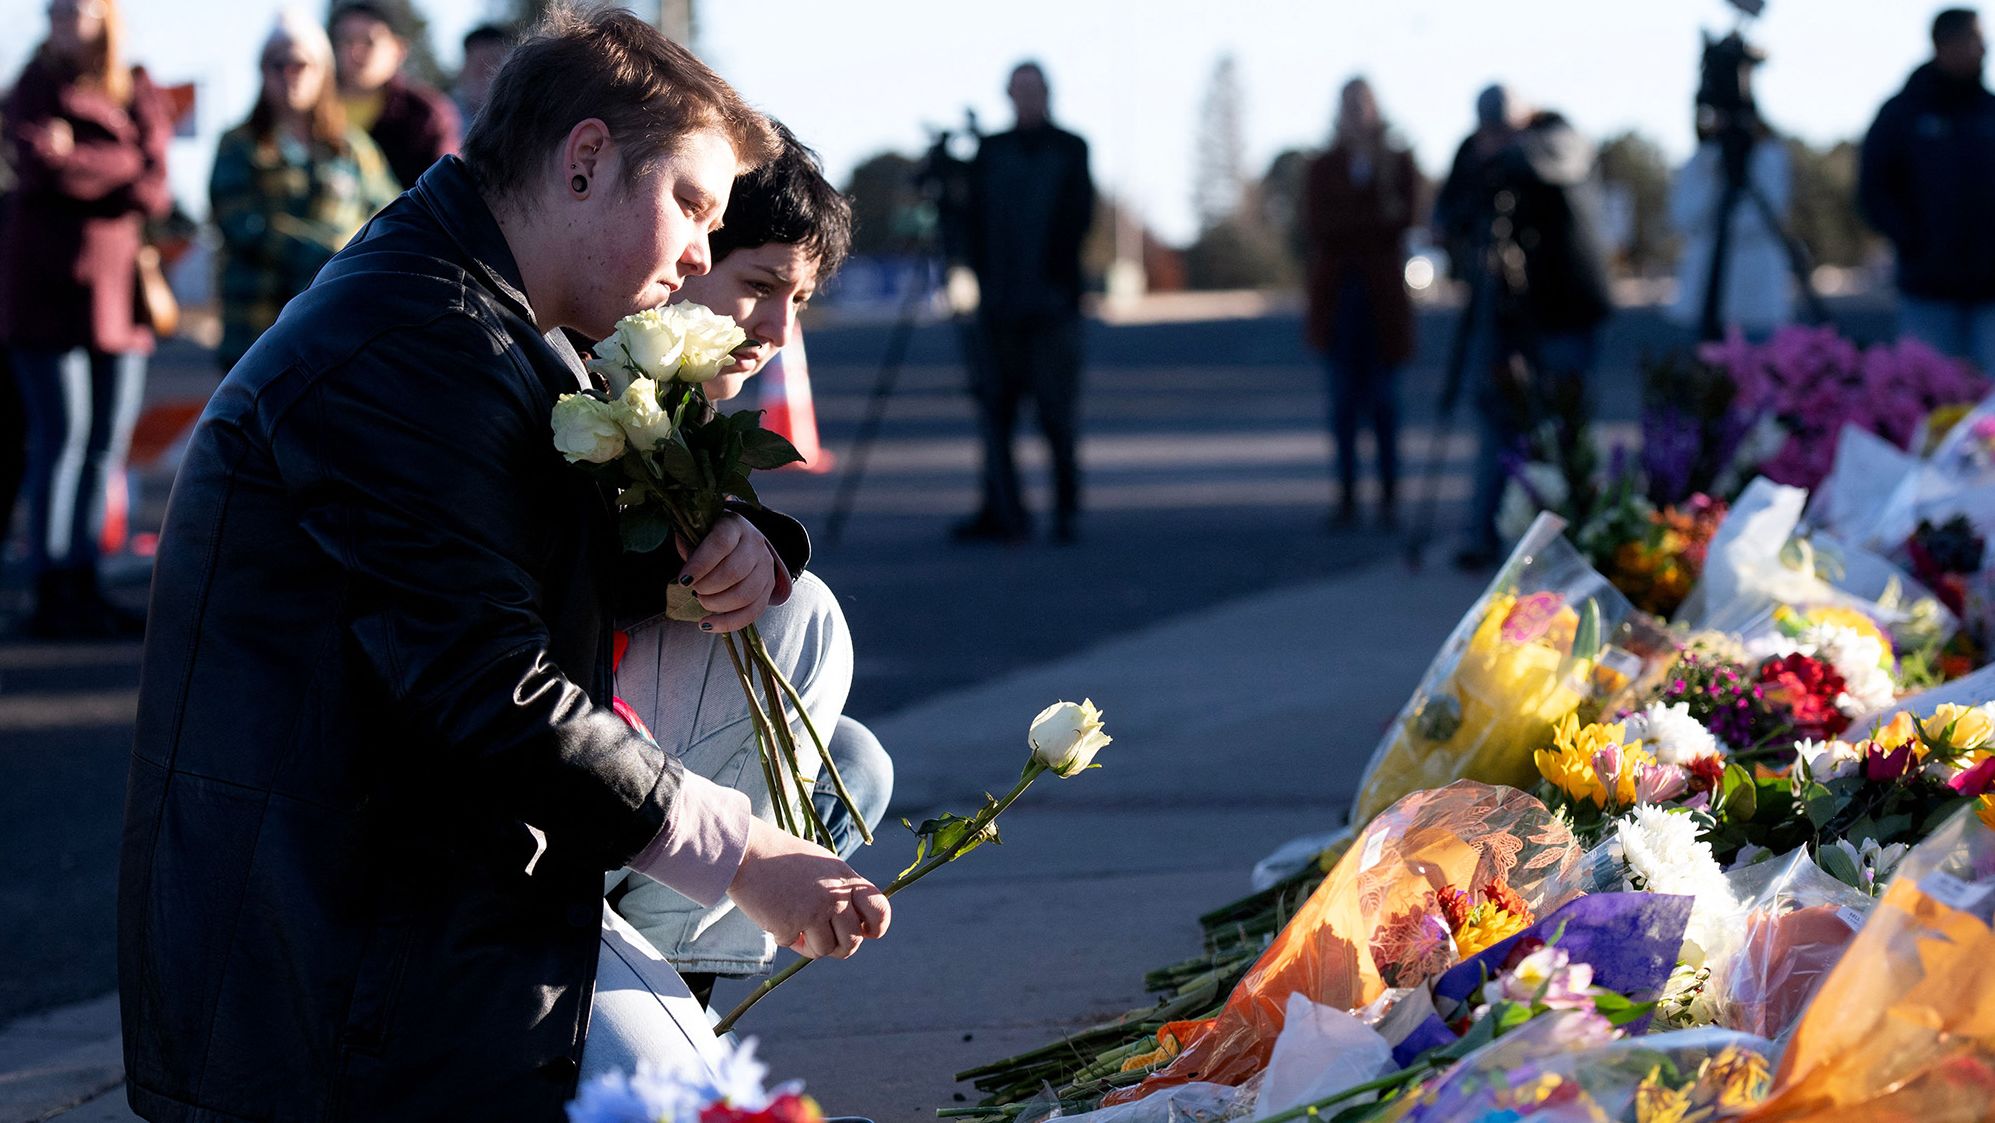 Mourners pay their respects to the victims of the mass shooting at Club Q, an LGBTQ nightclub, in Colorado Springs, Colorado, on November 20, 2022.